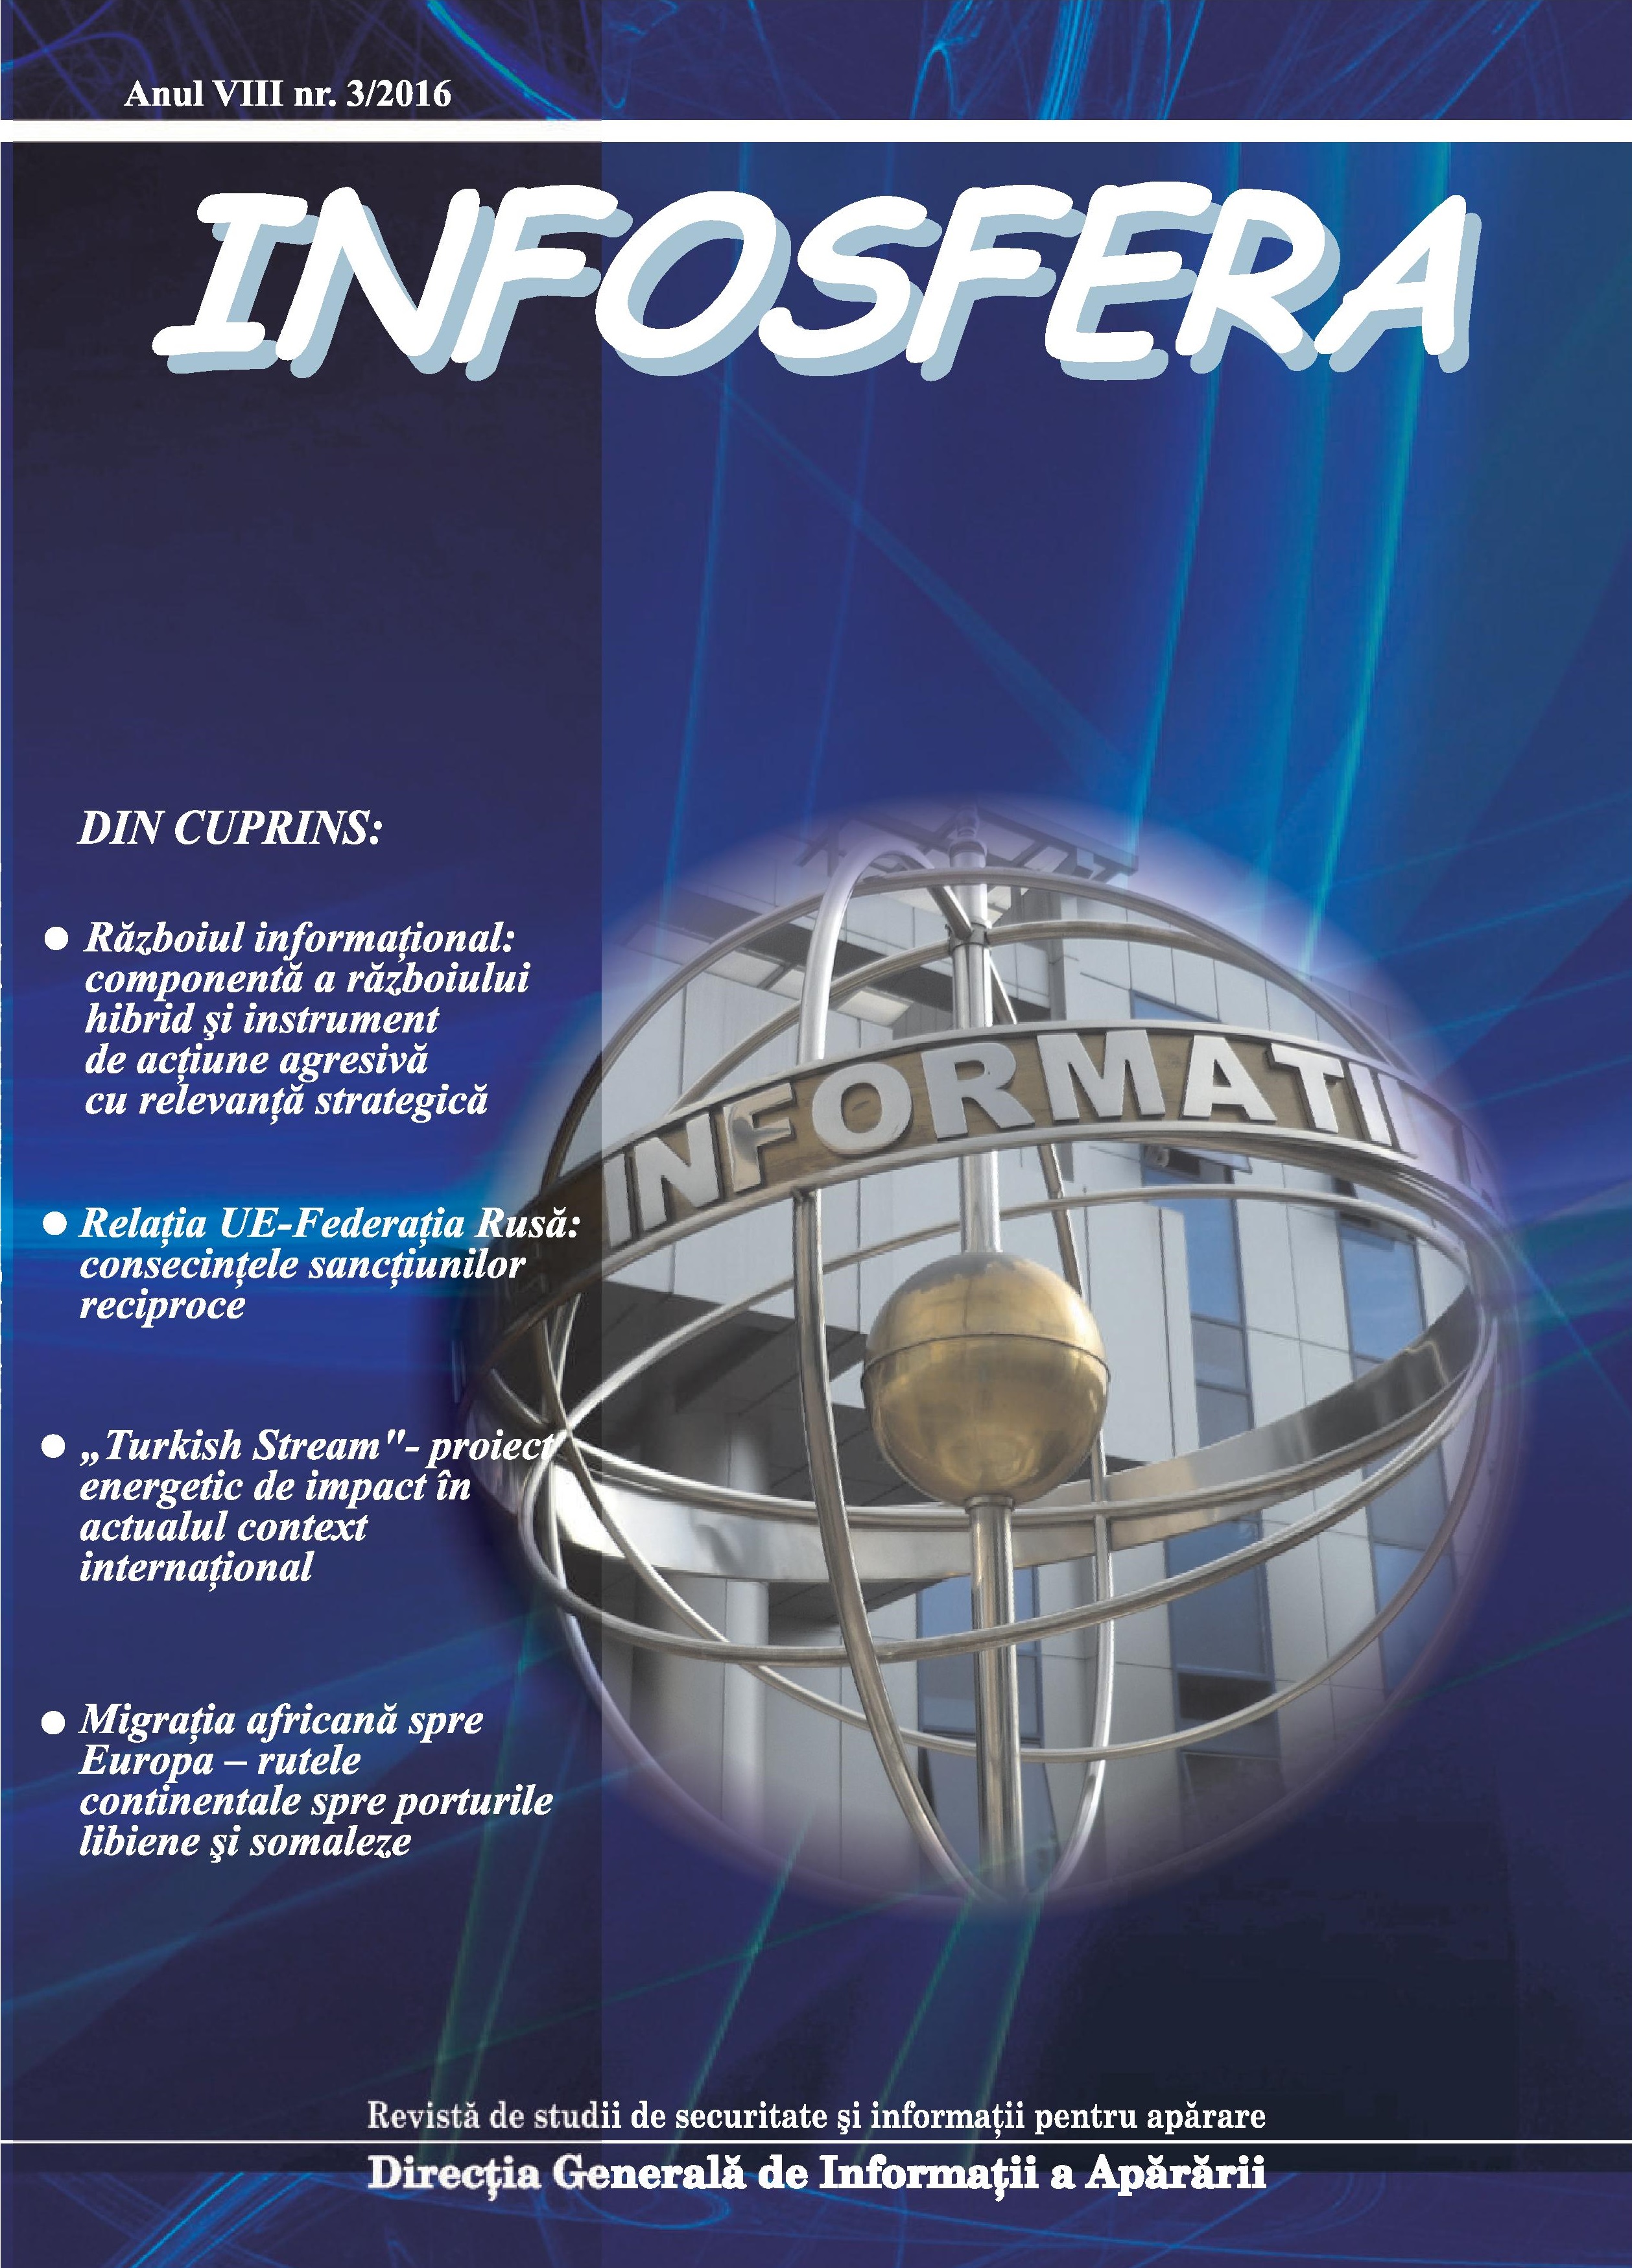 Cyber-Intelligence - a tool used for confrontation between states Cover Image